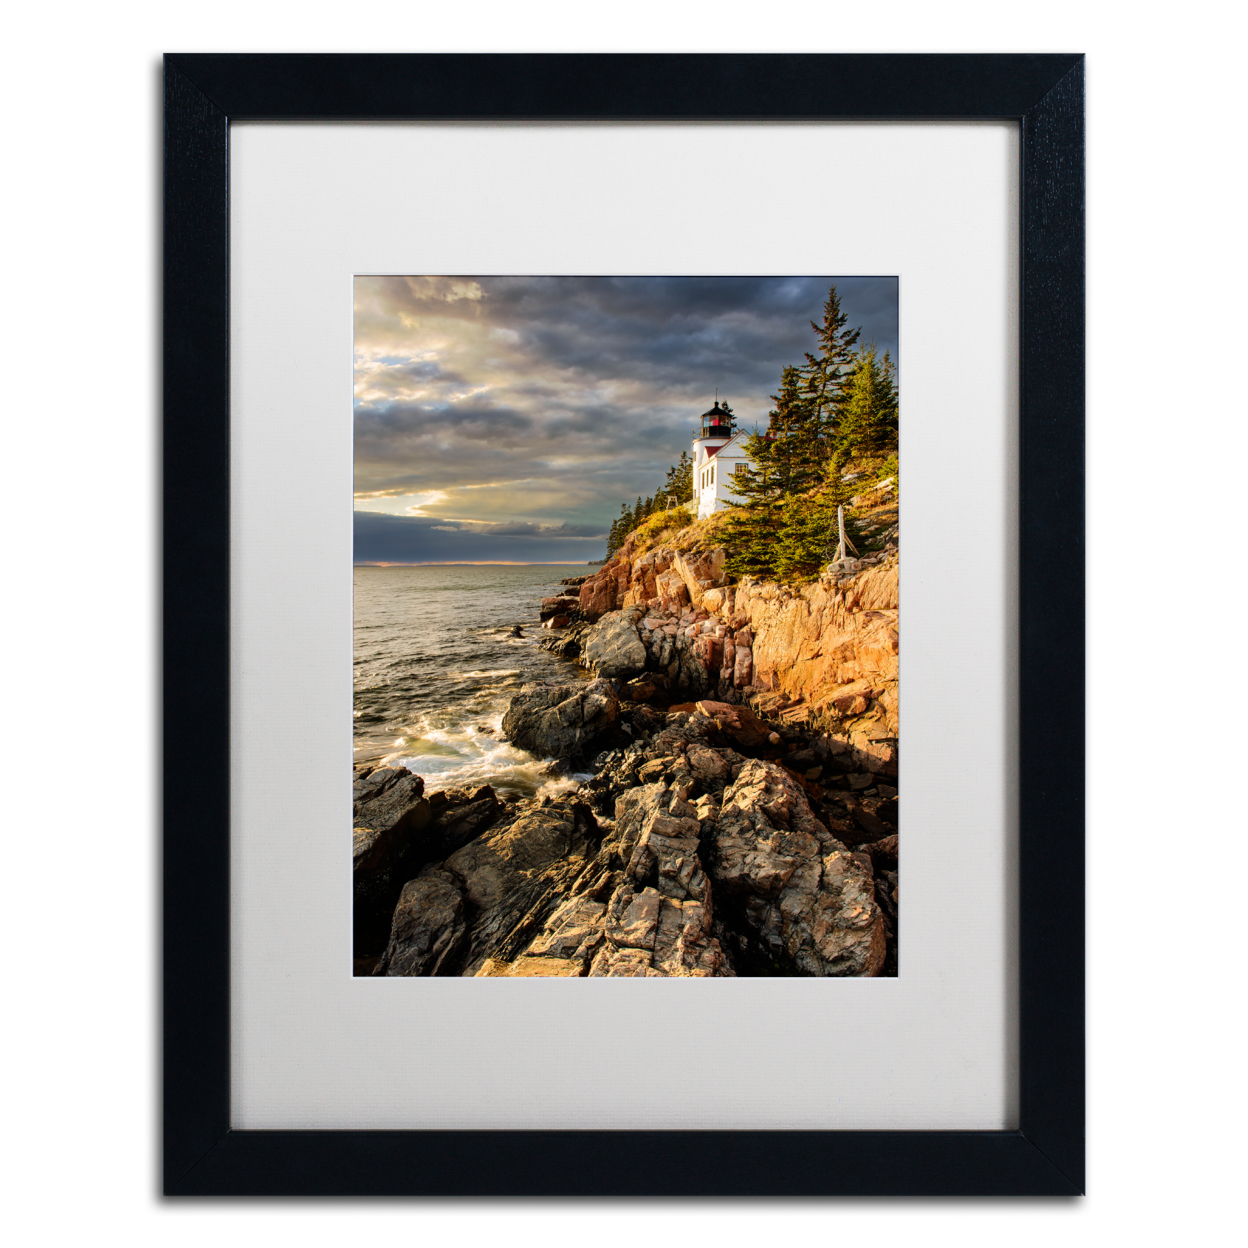 Michael Blanchette Photography 'On The Bluff' Black Wooden Framed Art 18 X 22 Inches